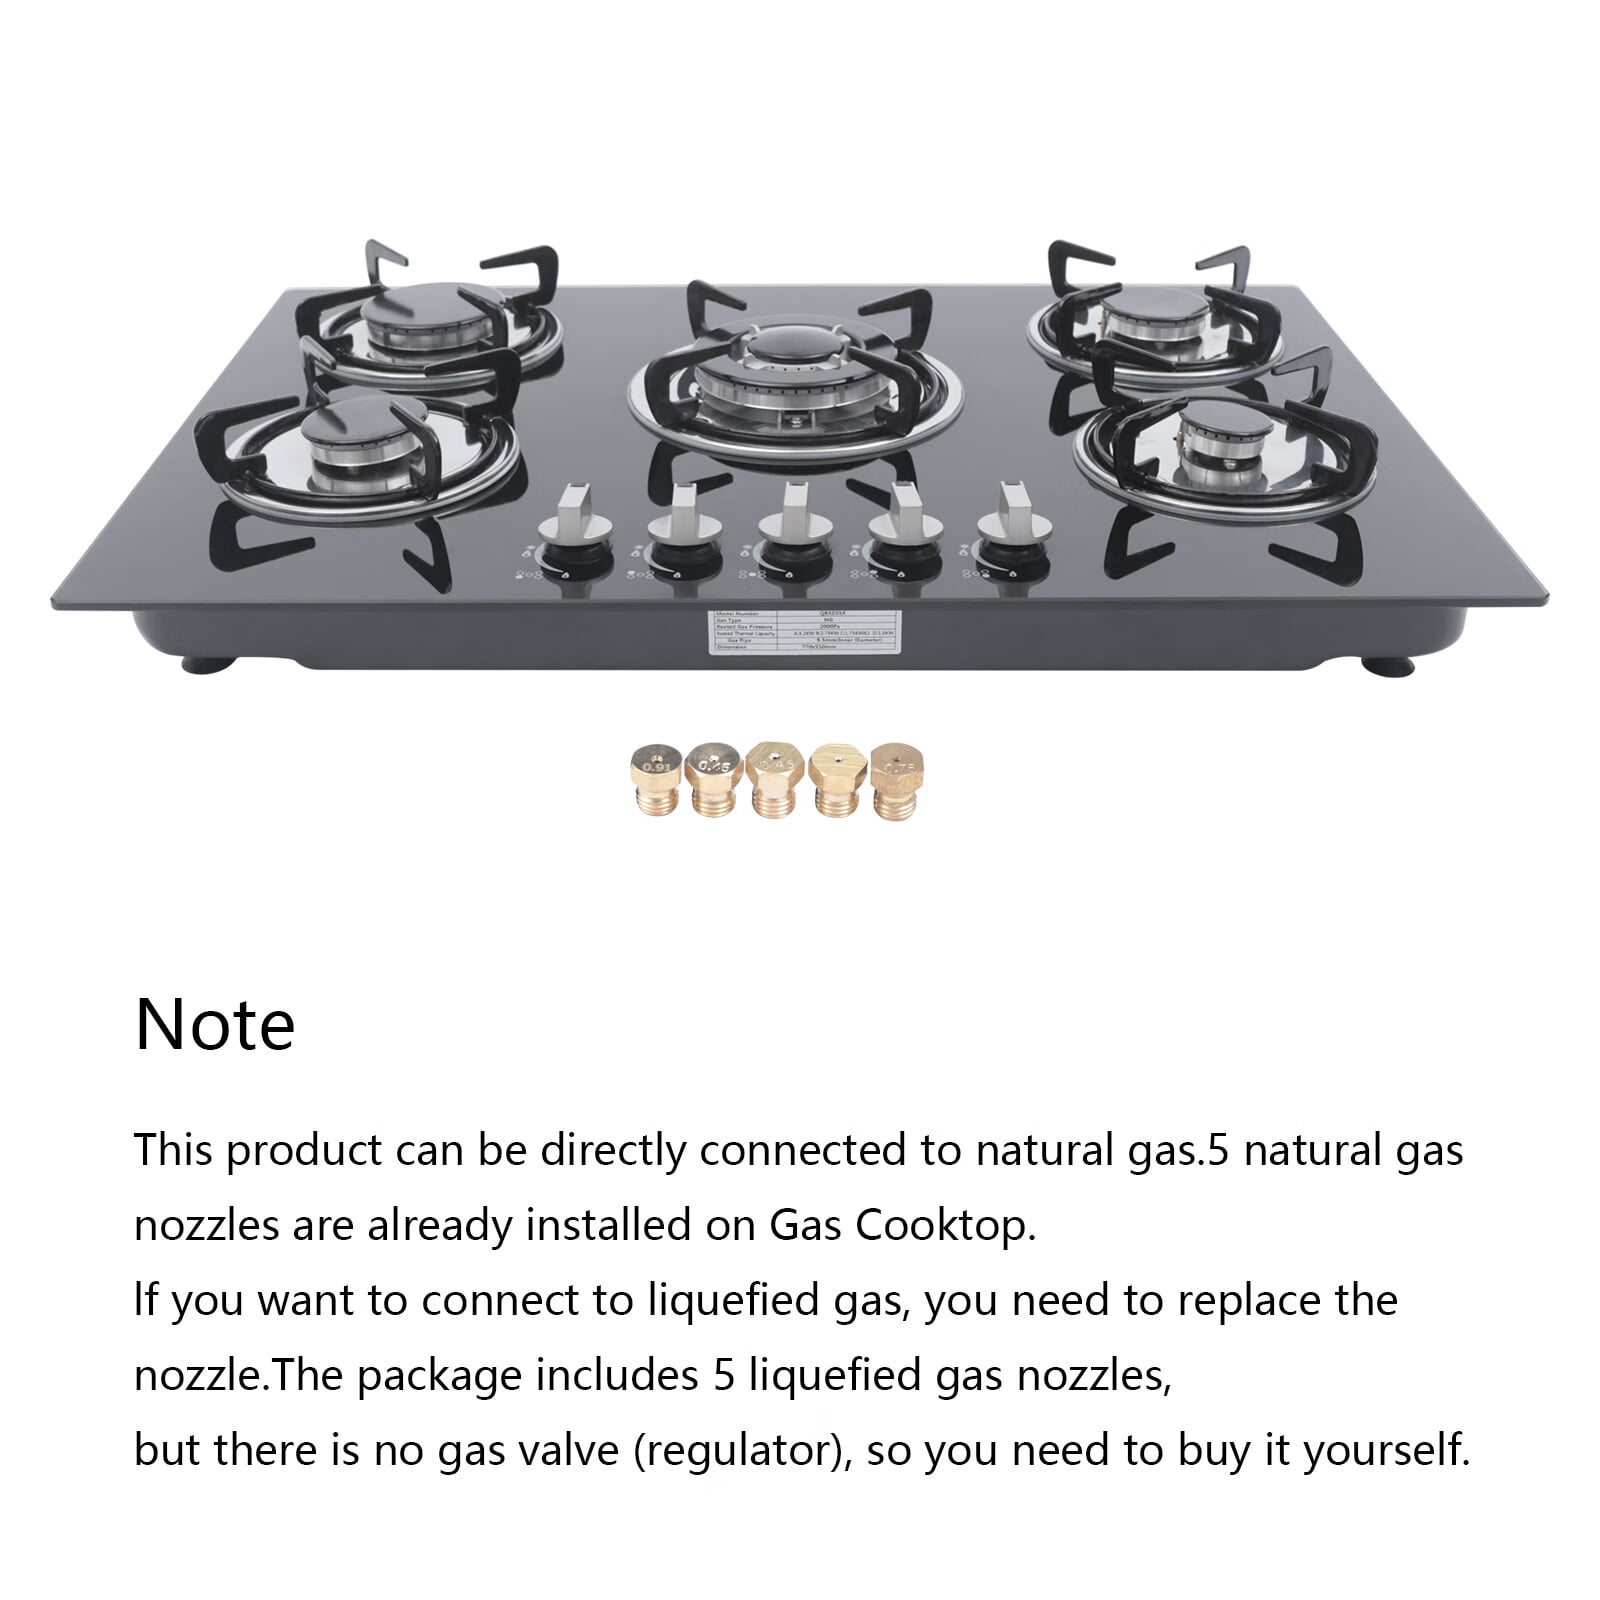 Amazon.com: Summit GCJ536SS, 34-Inch-Wide 5-Burner Gas Cooktop, Stainless  Steel with Sealed Burners, Cast Iron Grates, NG/LPG Conversion Kit, Wok Ring,  Flame Failure Protection, Easy to Clean, Cord Included : Appliances